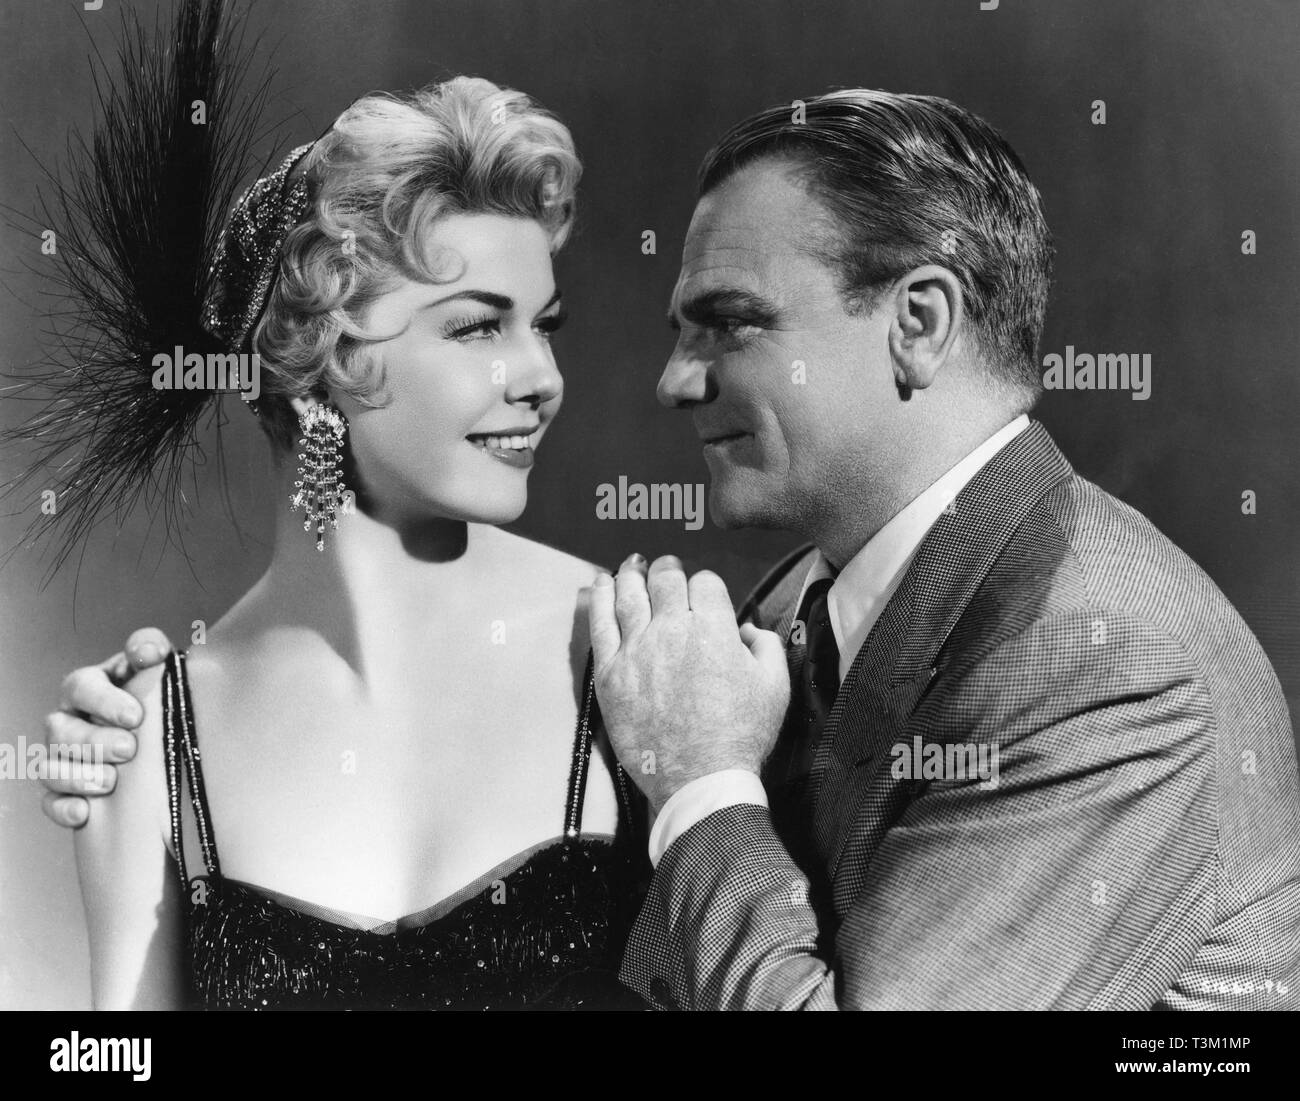 Doris Day as Ruth Etting James Cagney as gangster Marty Snyder  LOVE ME OR LEAVE ME 1955 director Charles Vidor Metro Goldwyn Mayer Stock Photo